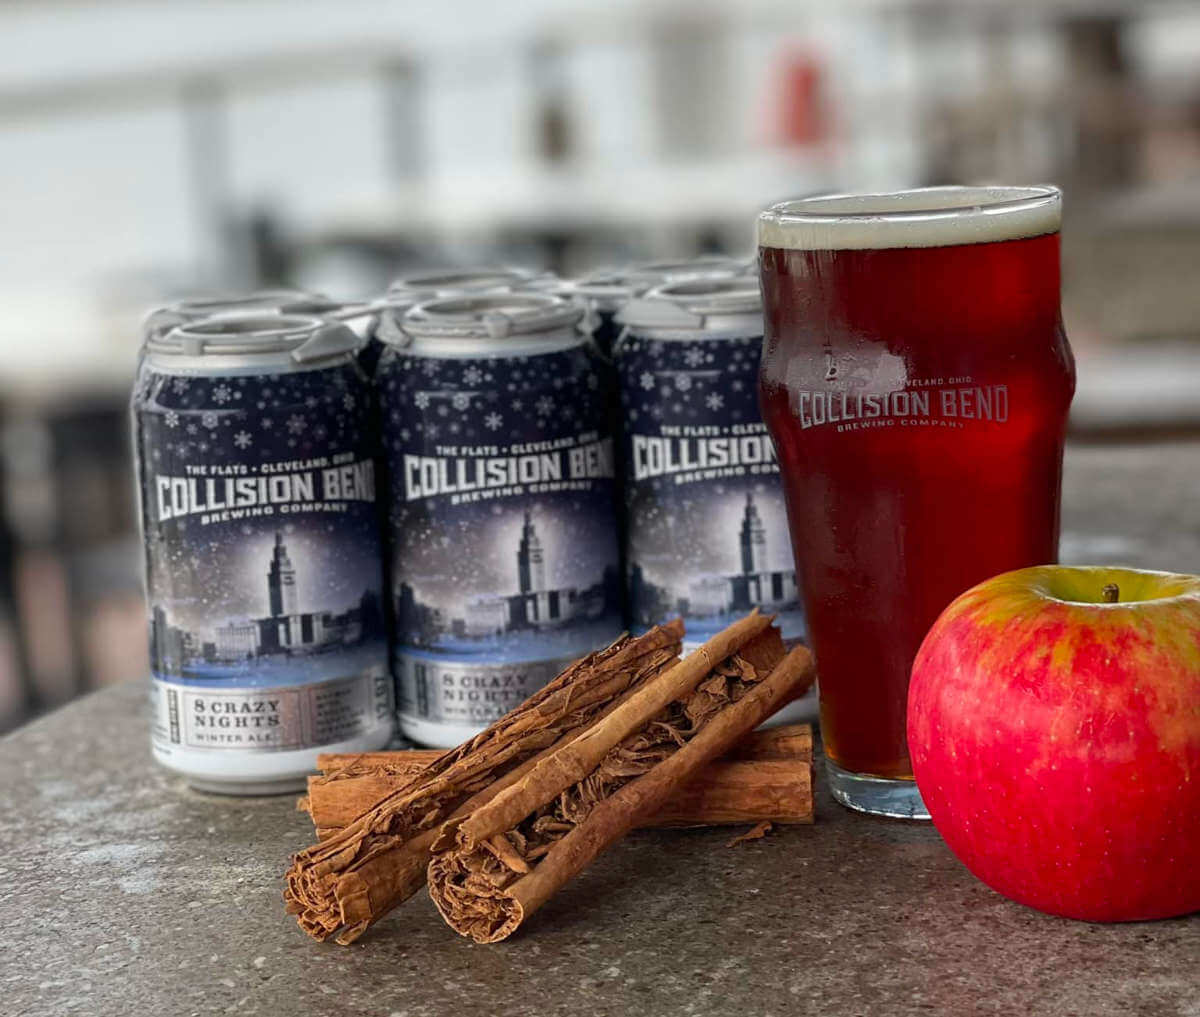 Advent Beer Calendar 2022: Day 18: Collision Bend 8 Crazy Nights